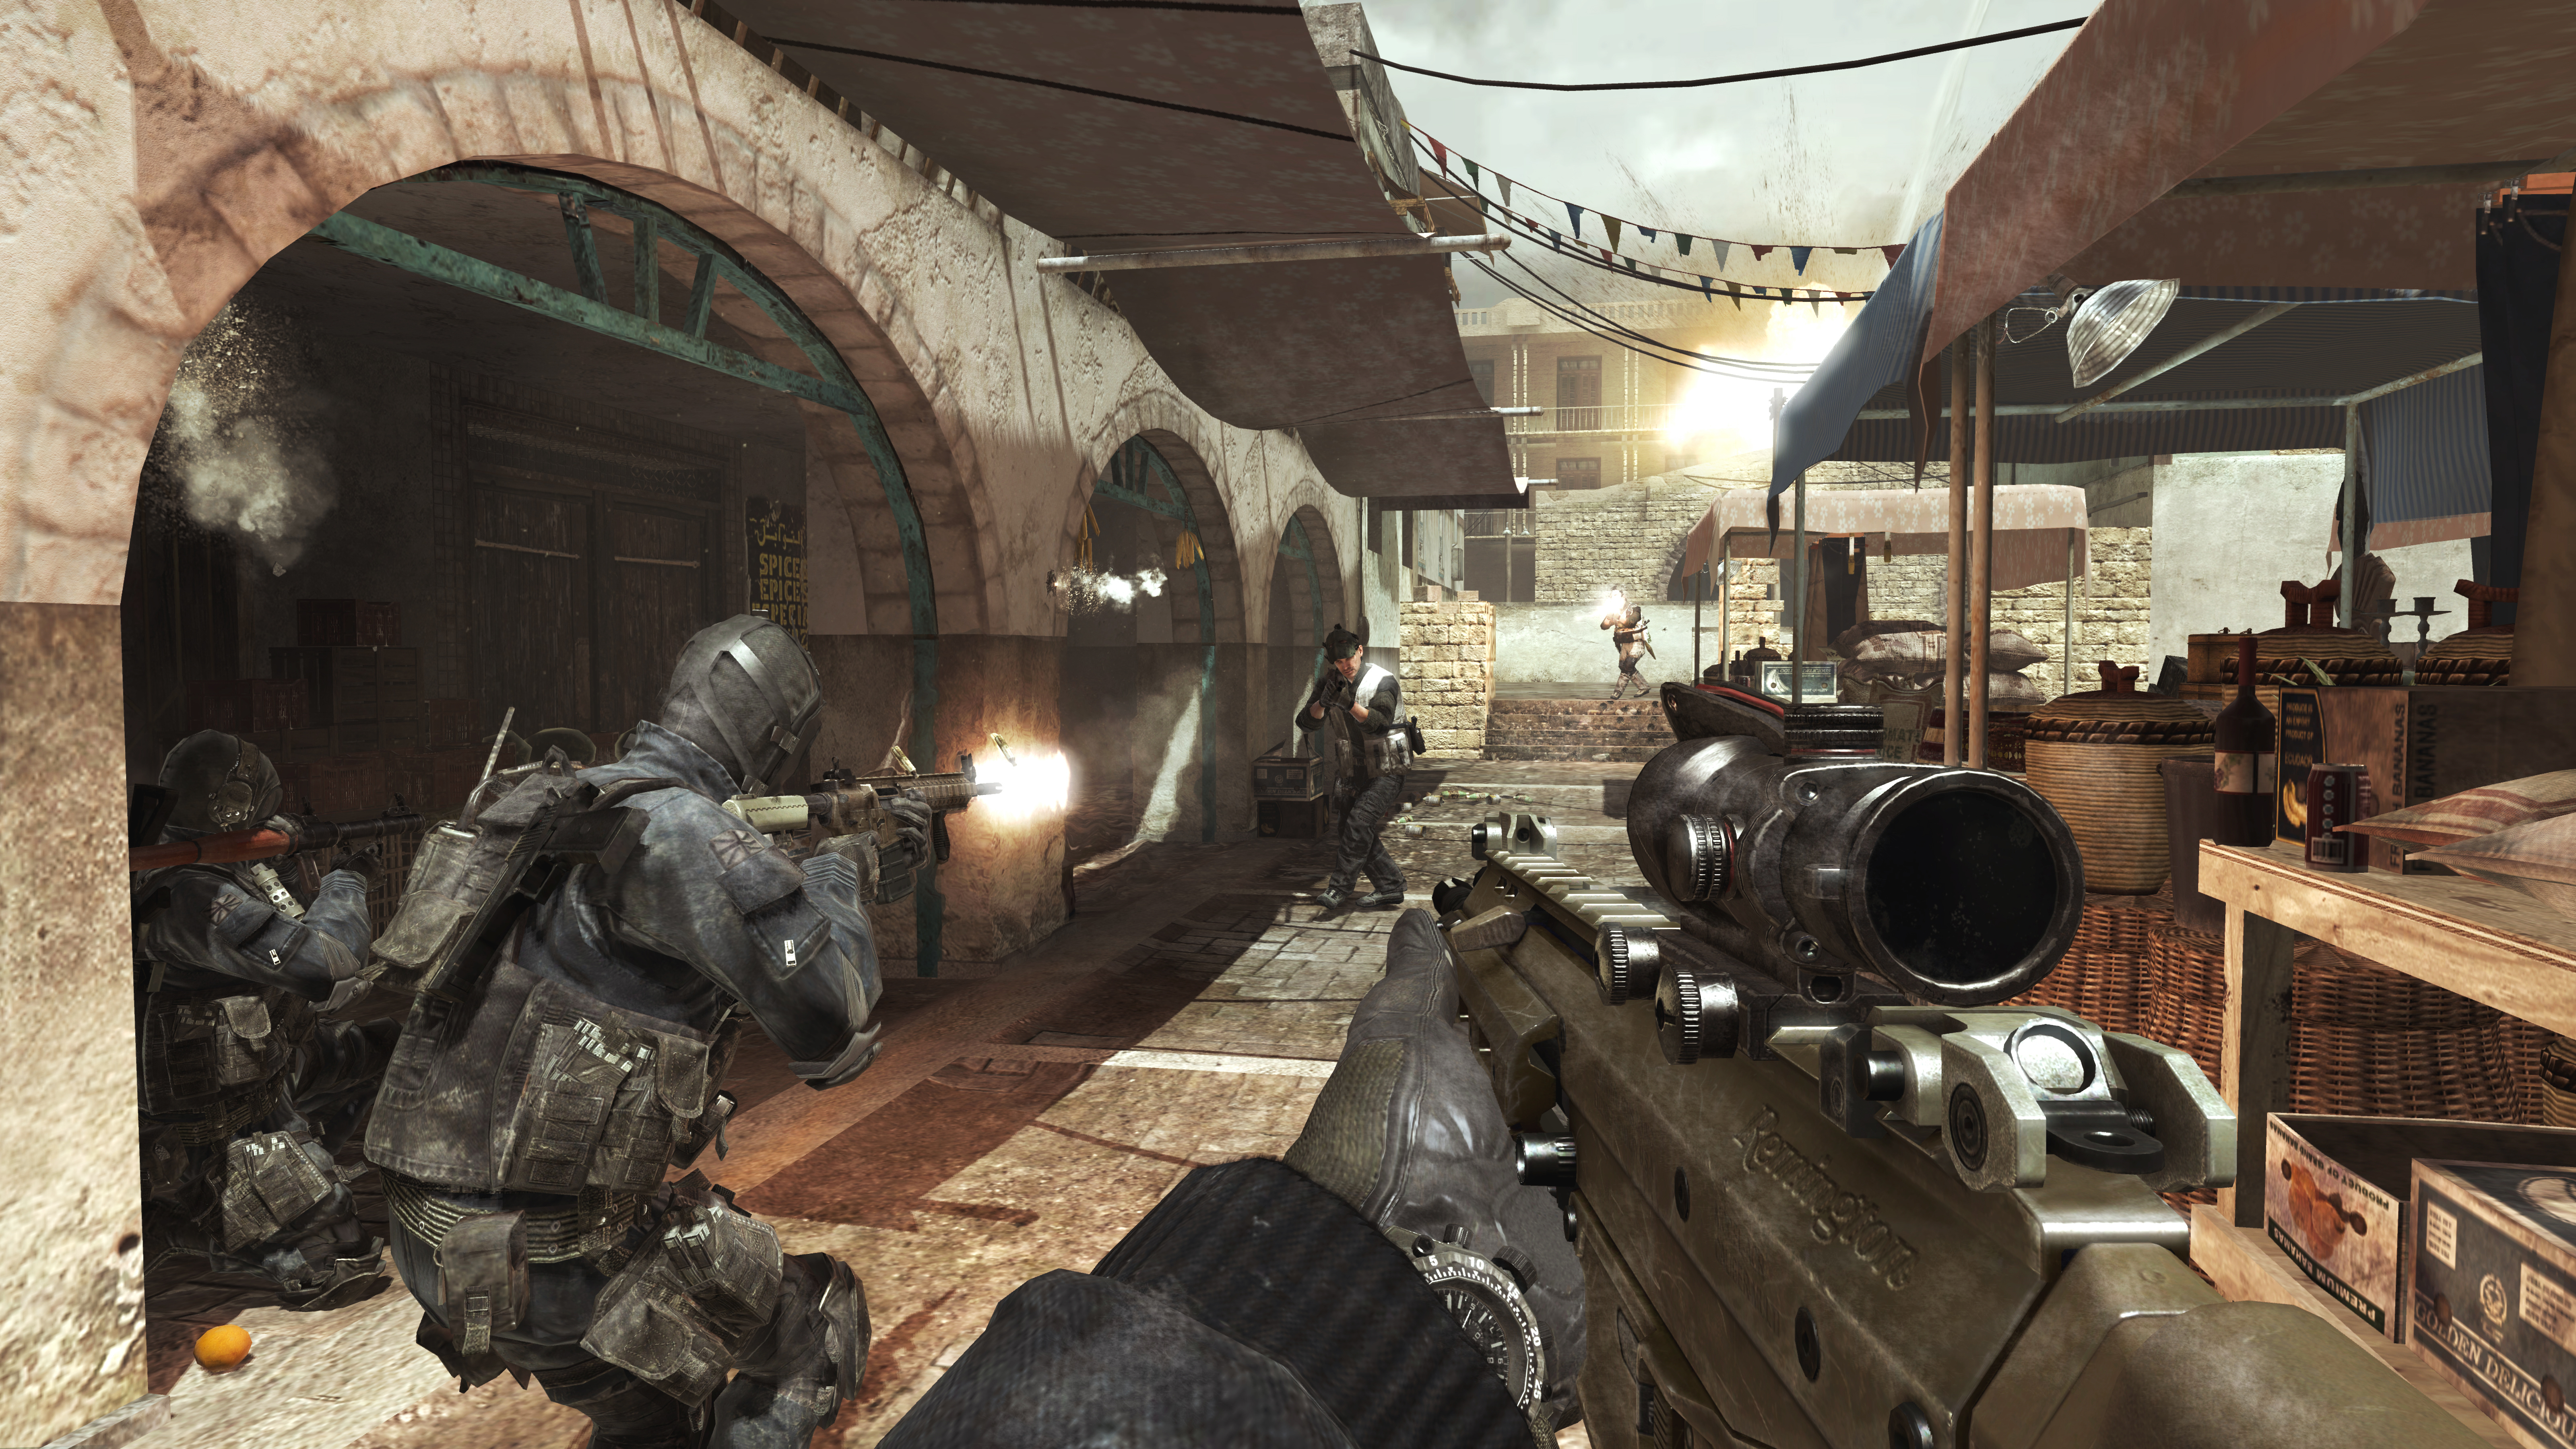 Modern Warfare 3 multiplayer launch is close, and people are